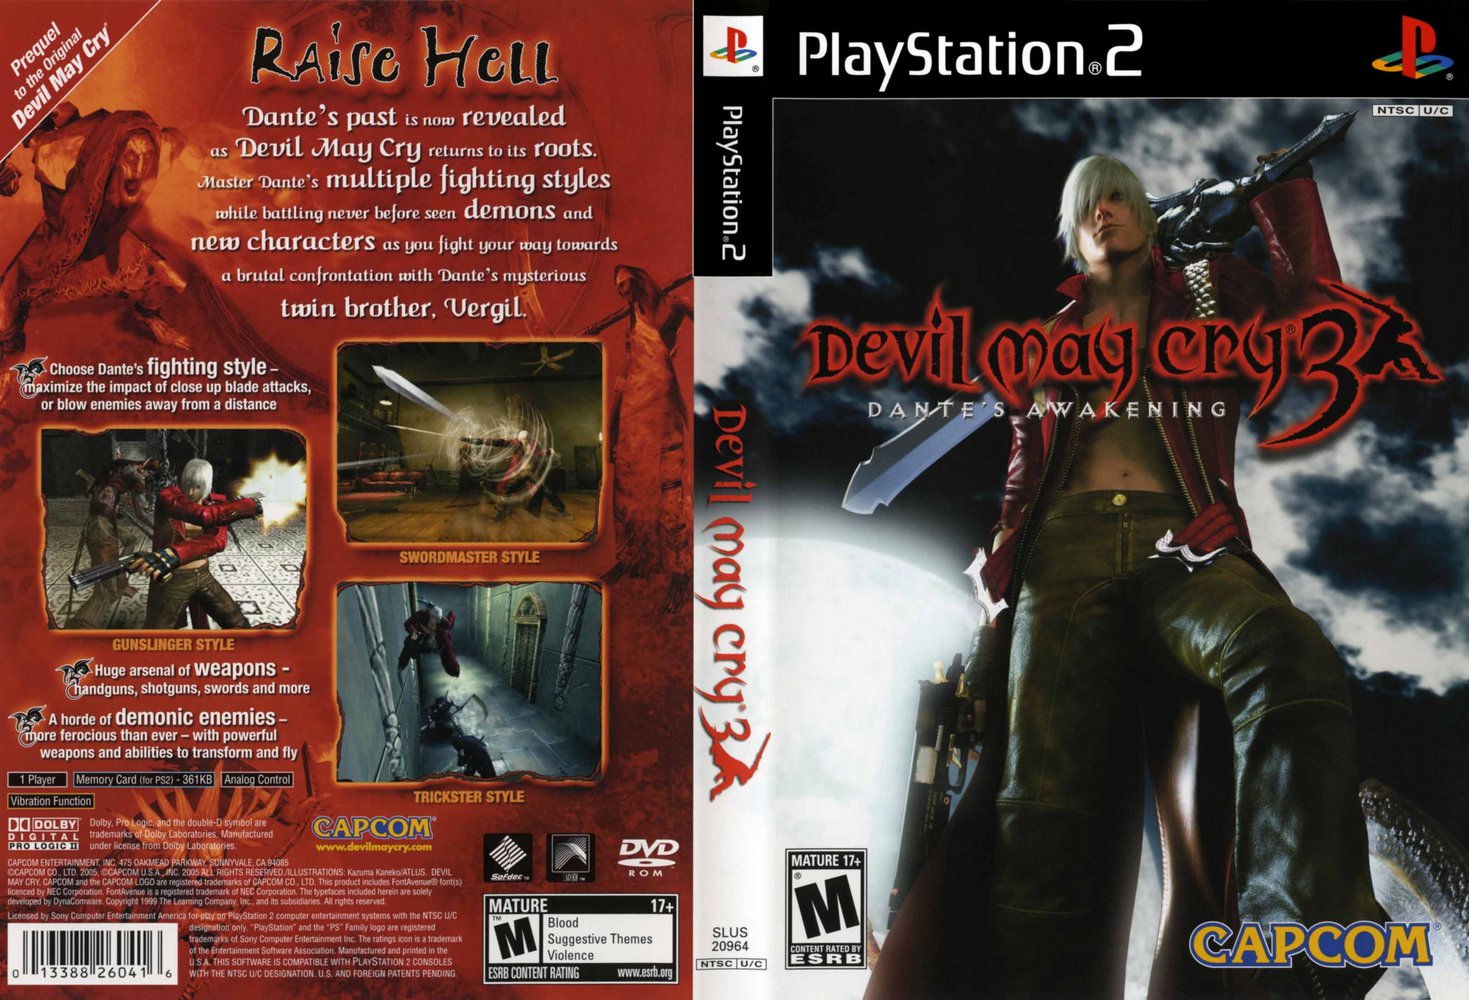 Devil+may+cry+3+special+edition+walkthrough+for+ps2